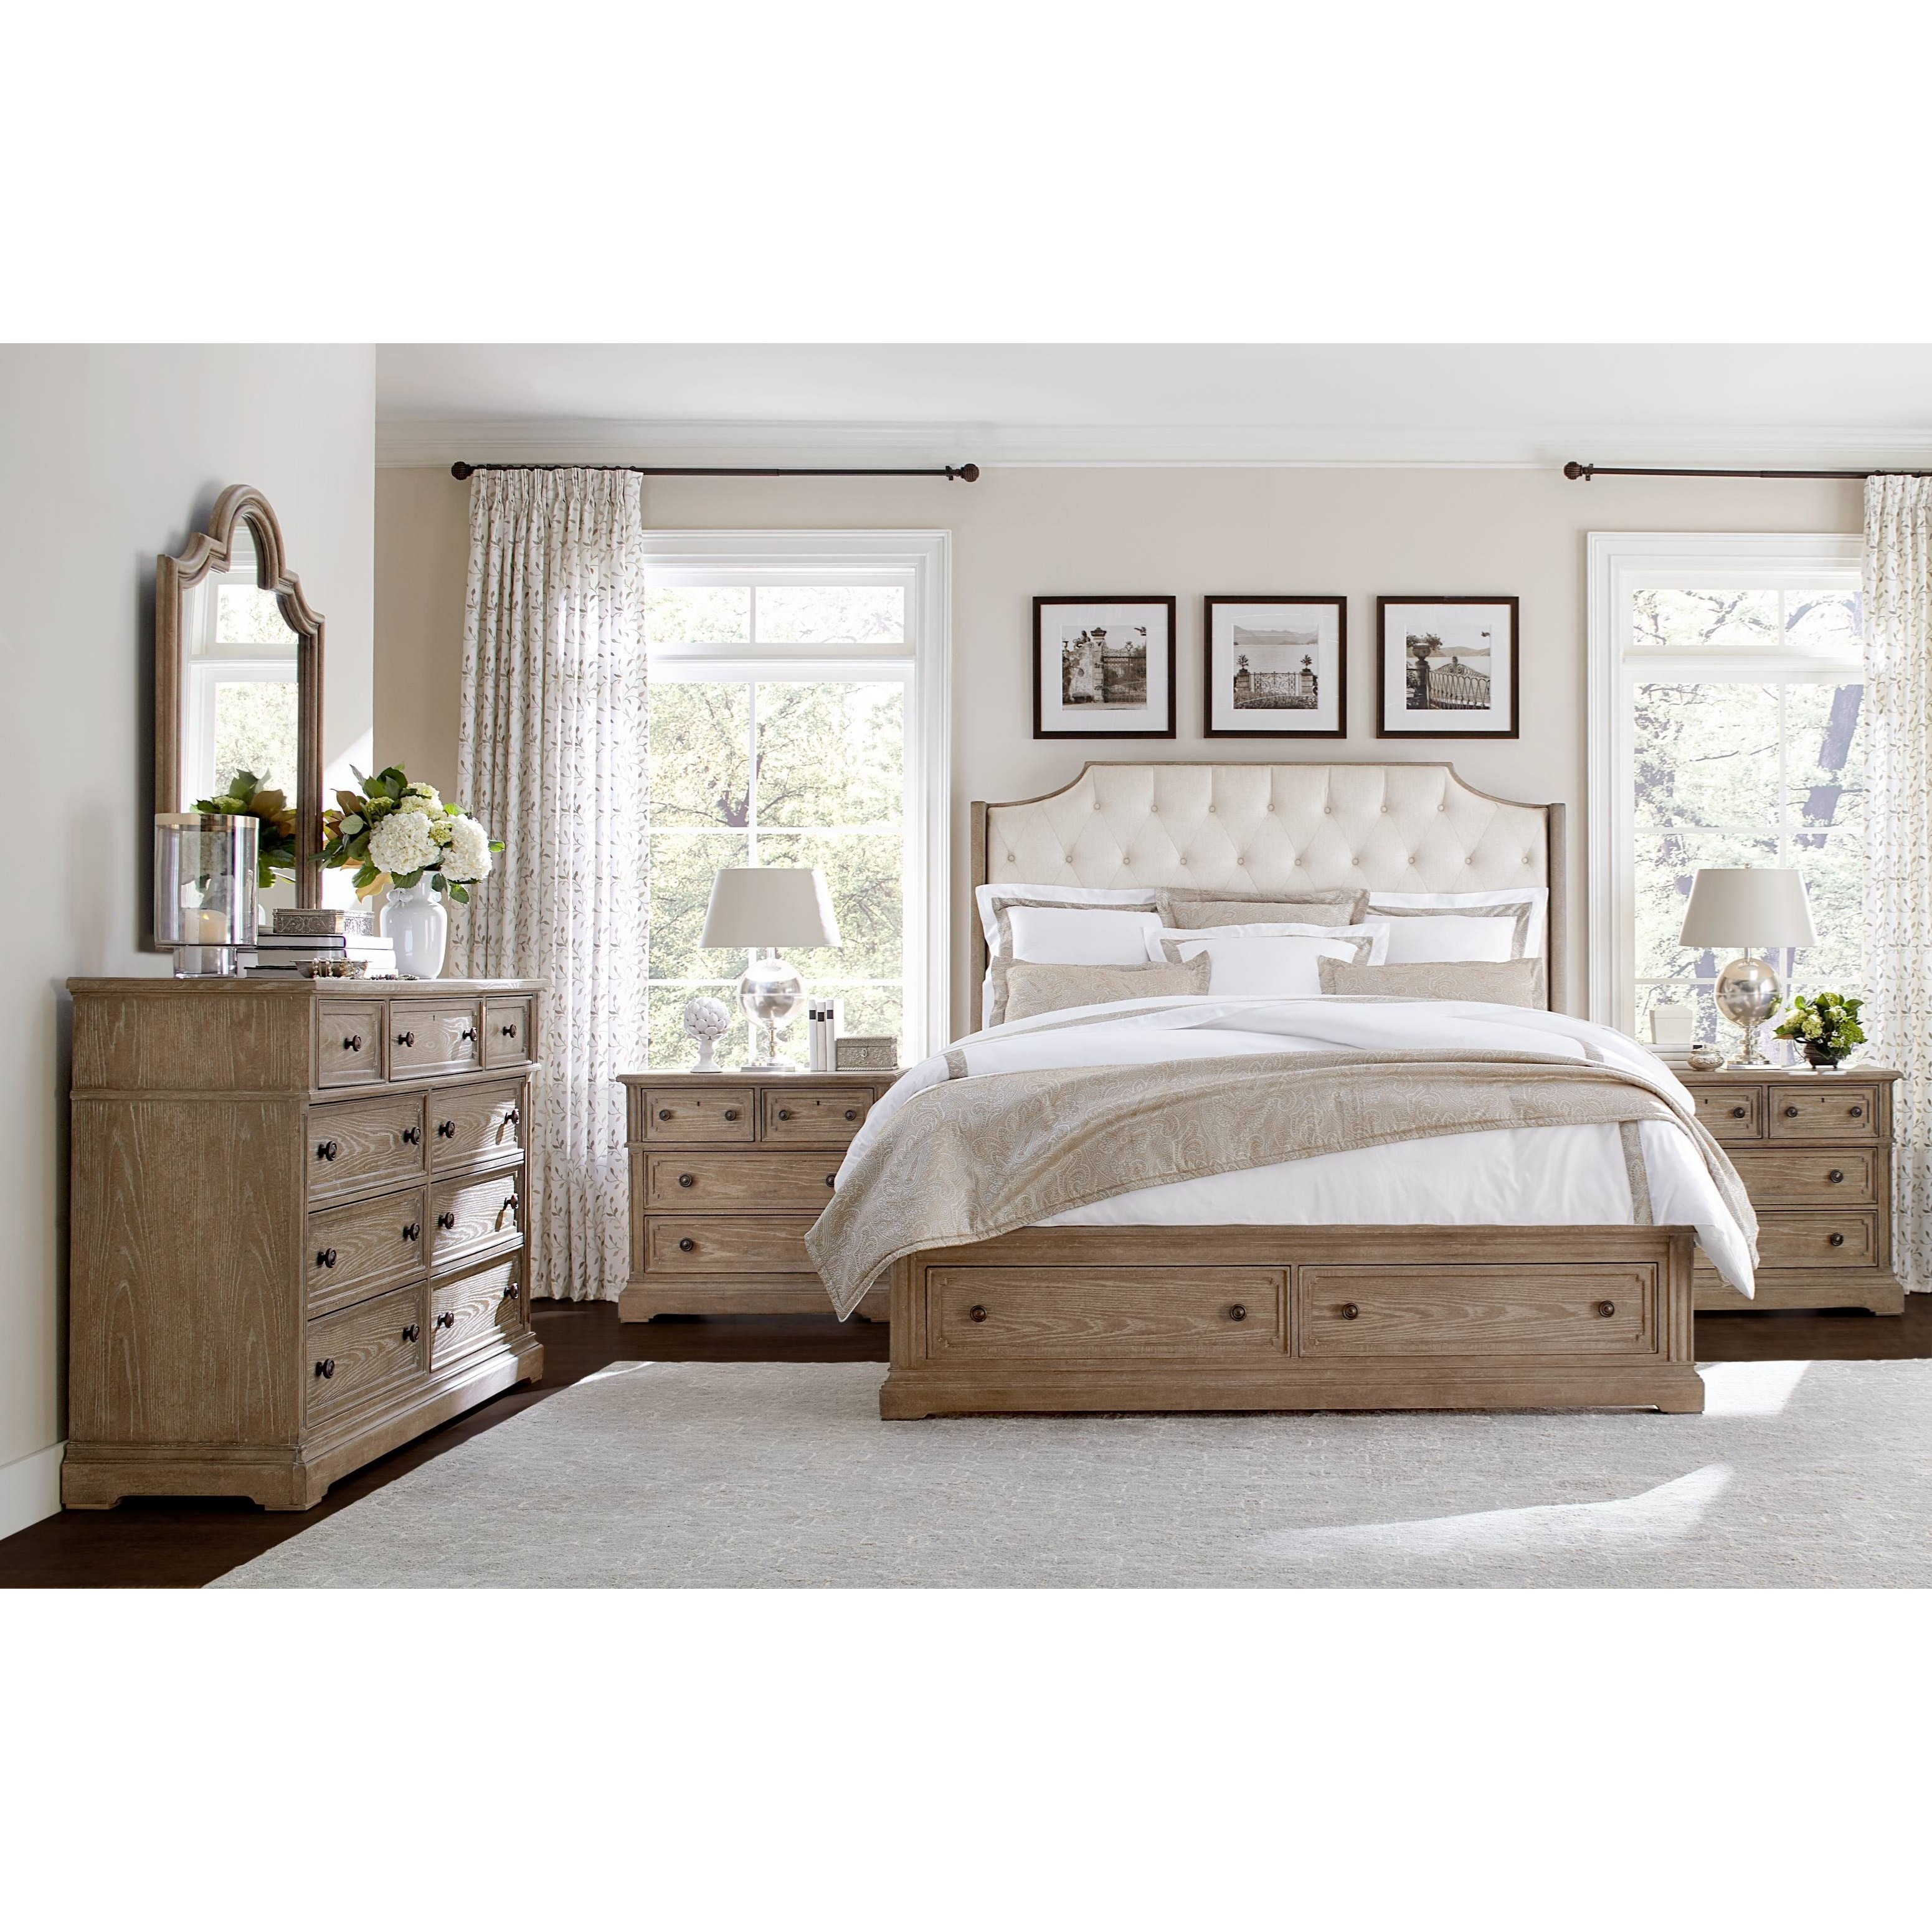 Wethersfield Estate King Bedroom Group Stanley Furniture At Dunk Bright Furniture pertaining to measurements 3102 X 3102